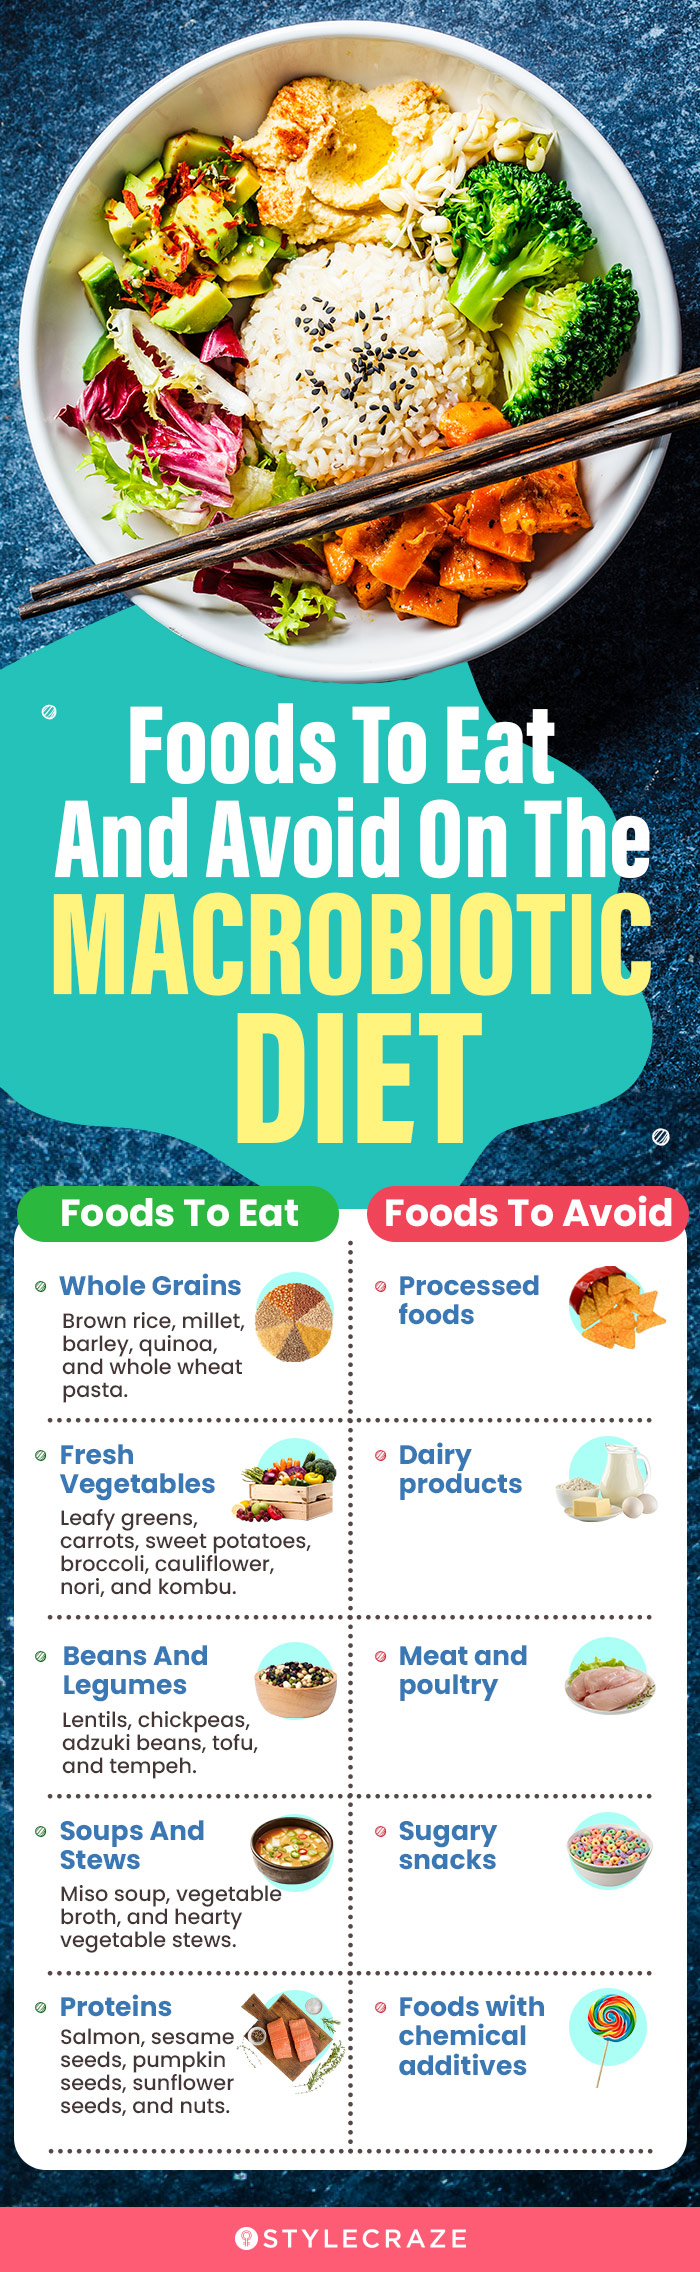 foods to eat and avoid on the macrobiotic diet (infographic)